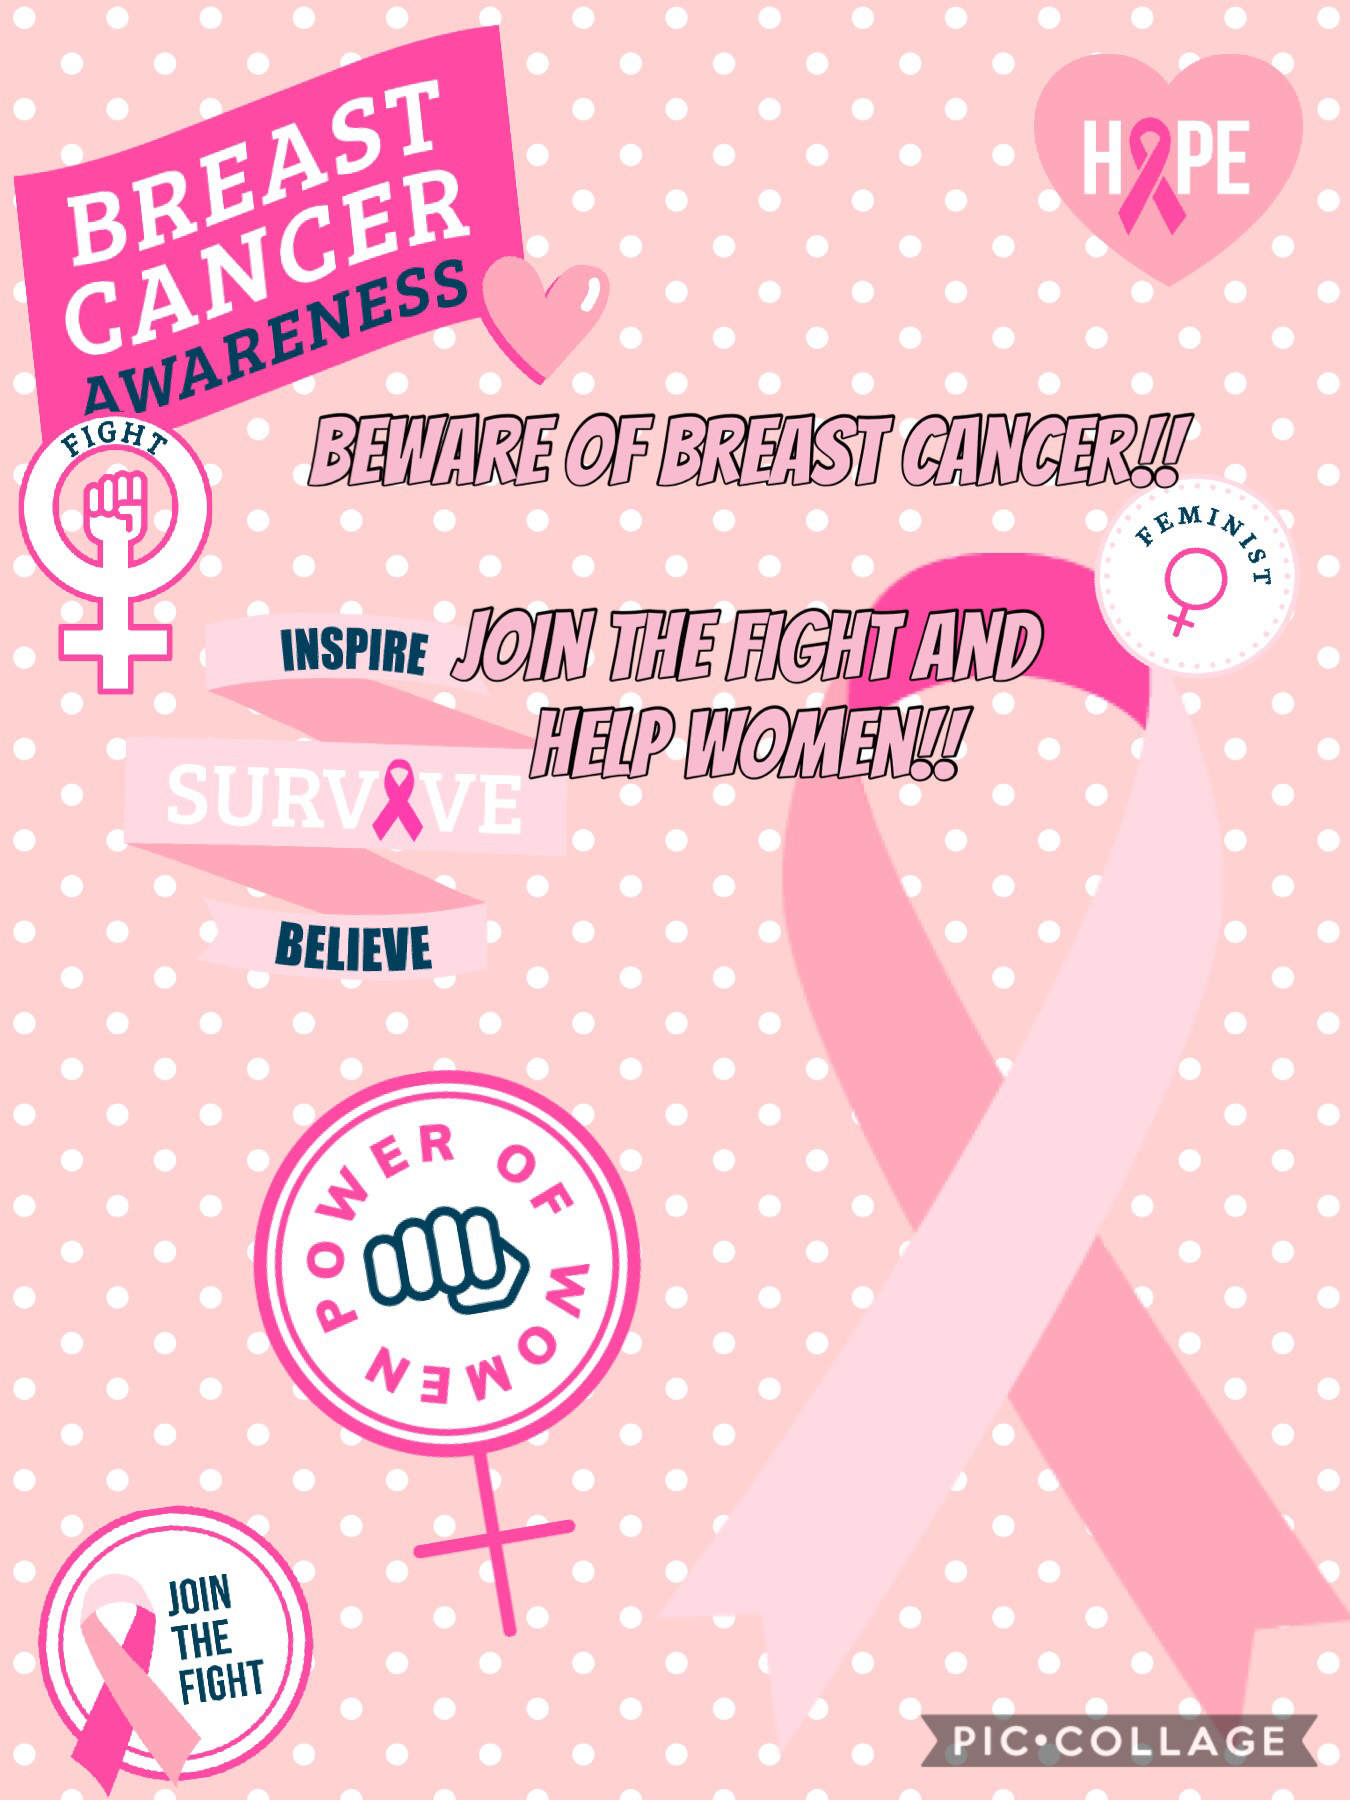 -TAP-

Beware of breast cancer!! Help the women!!